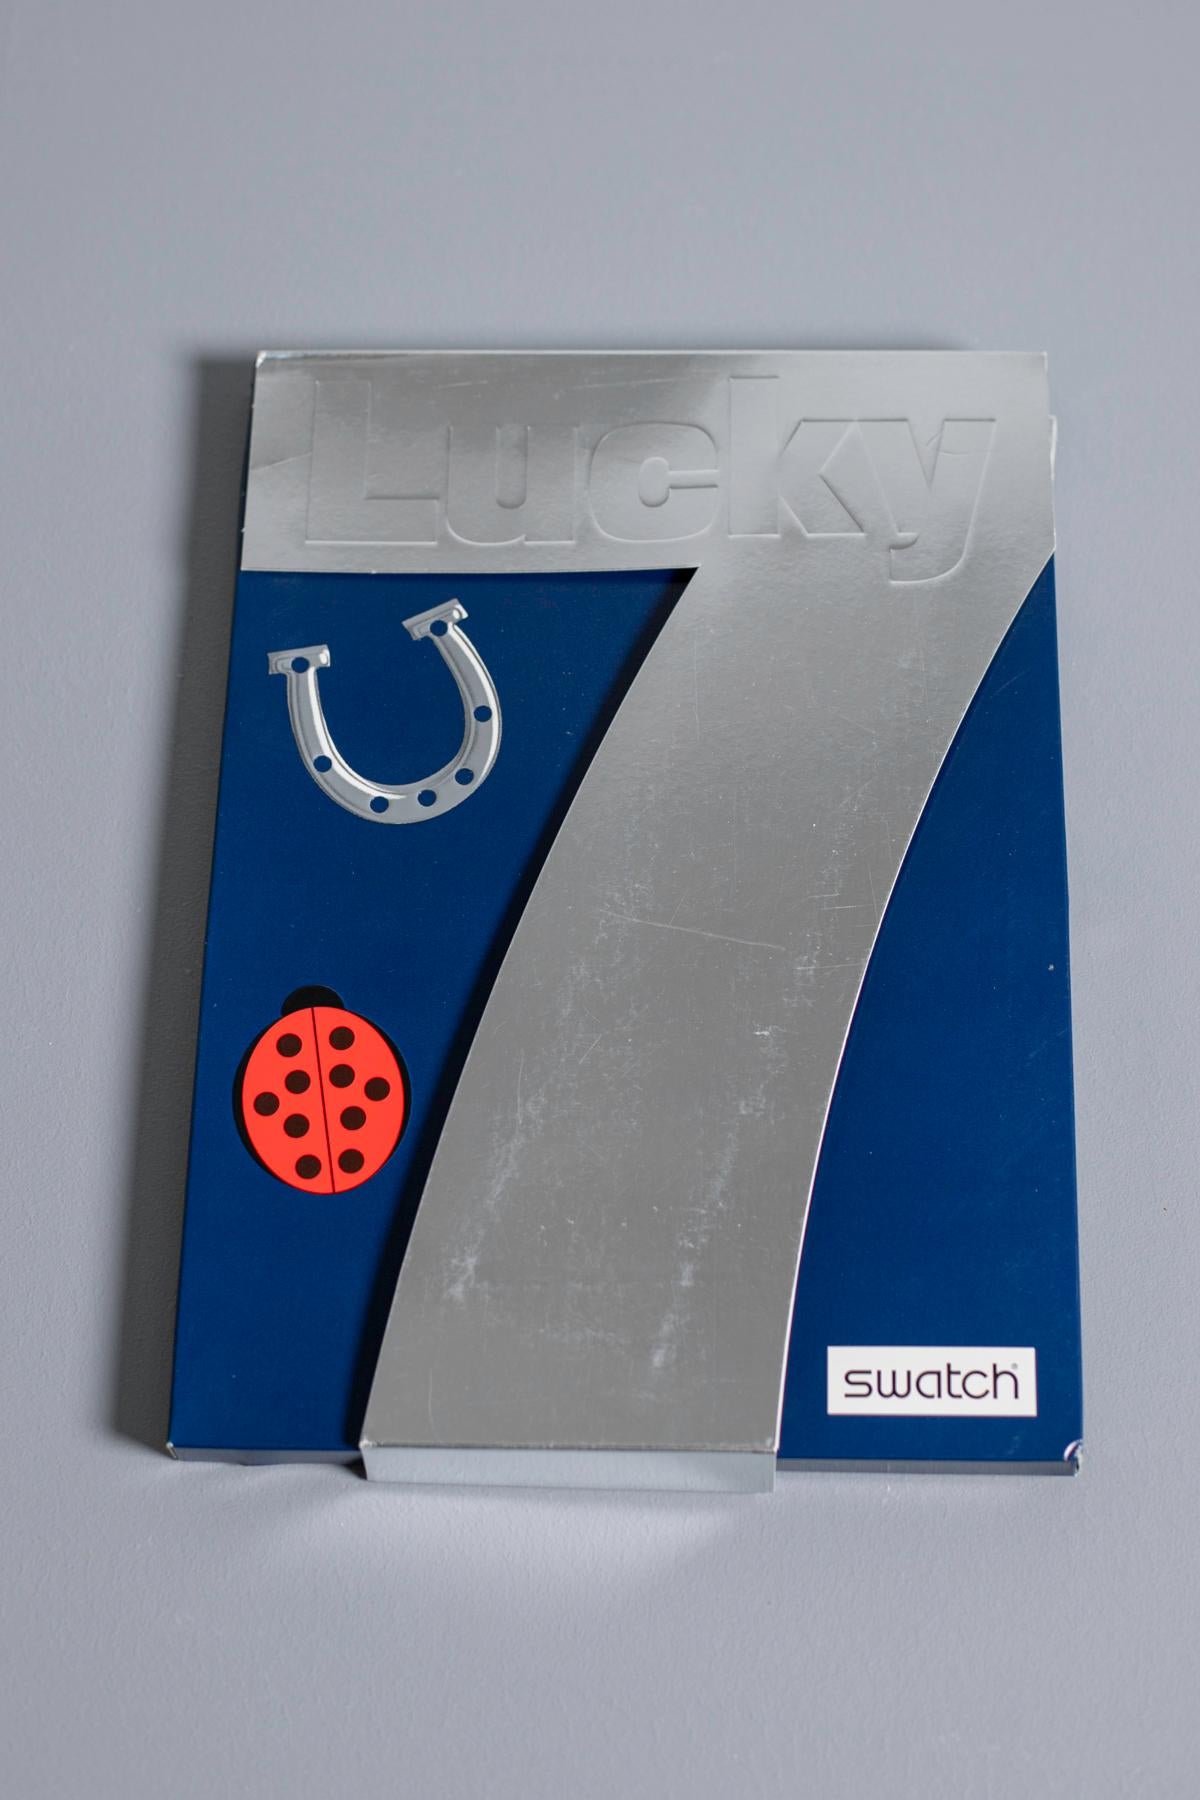 swatch lucky 7